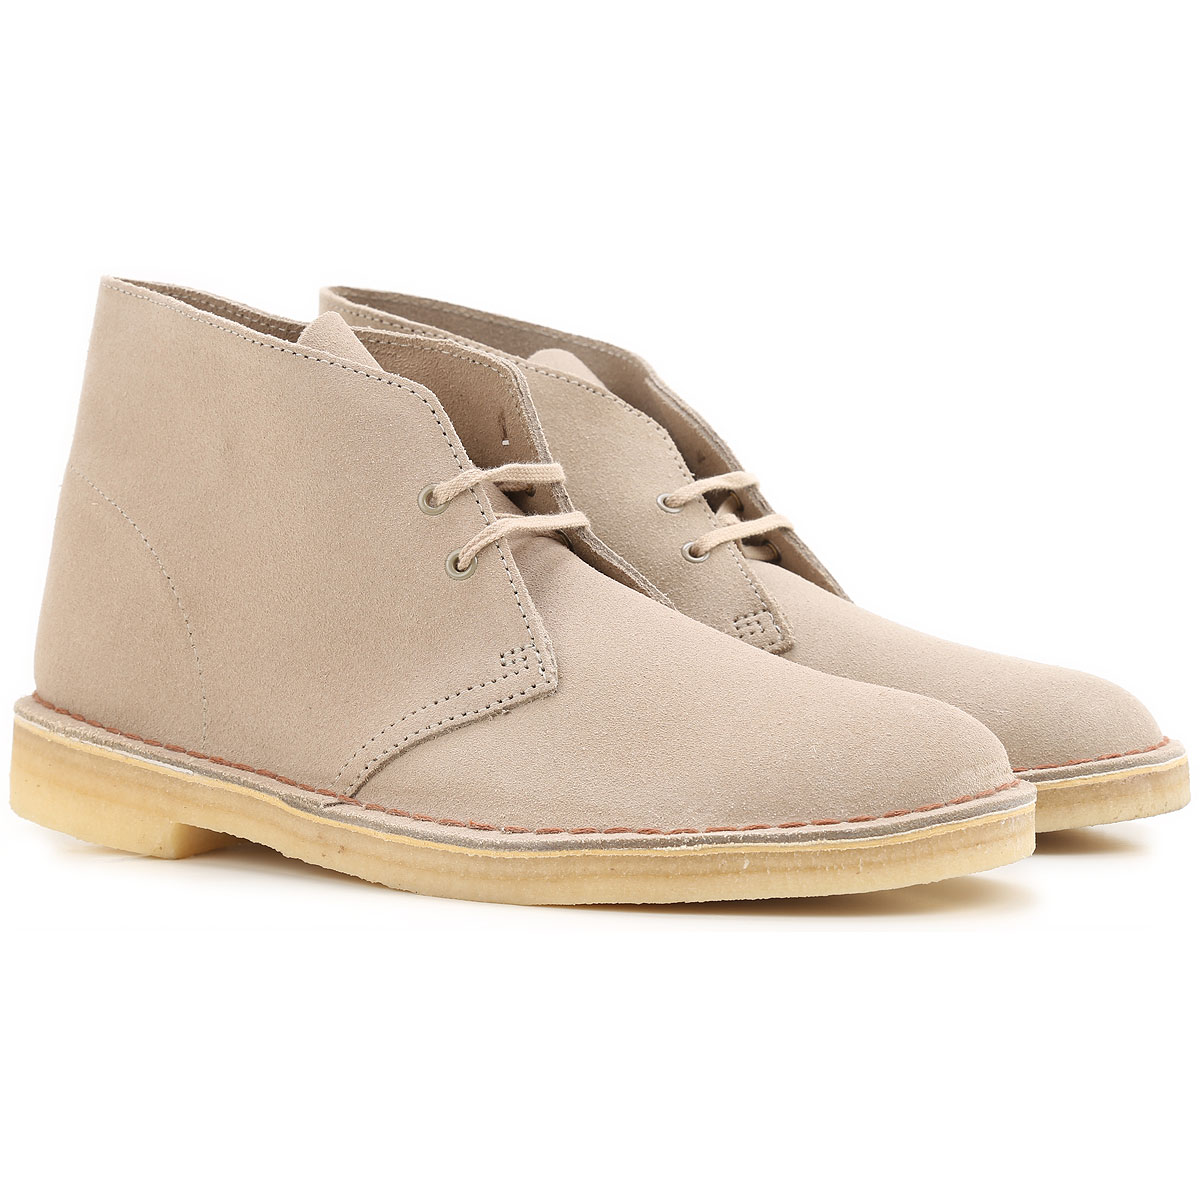 Mens Shoes Clarks, Style code 118261176sand